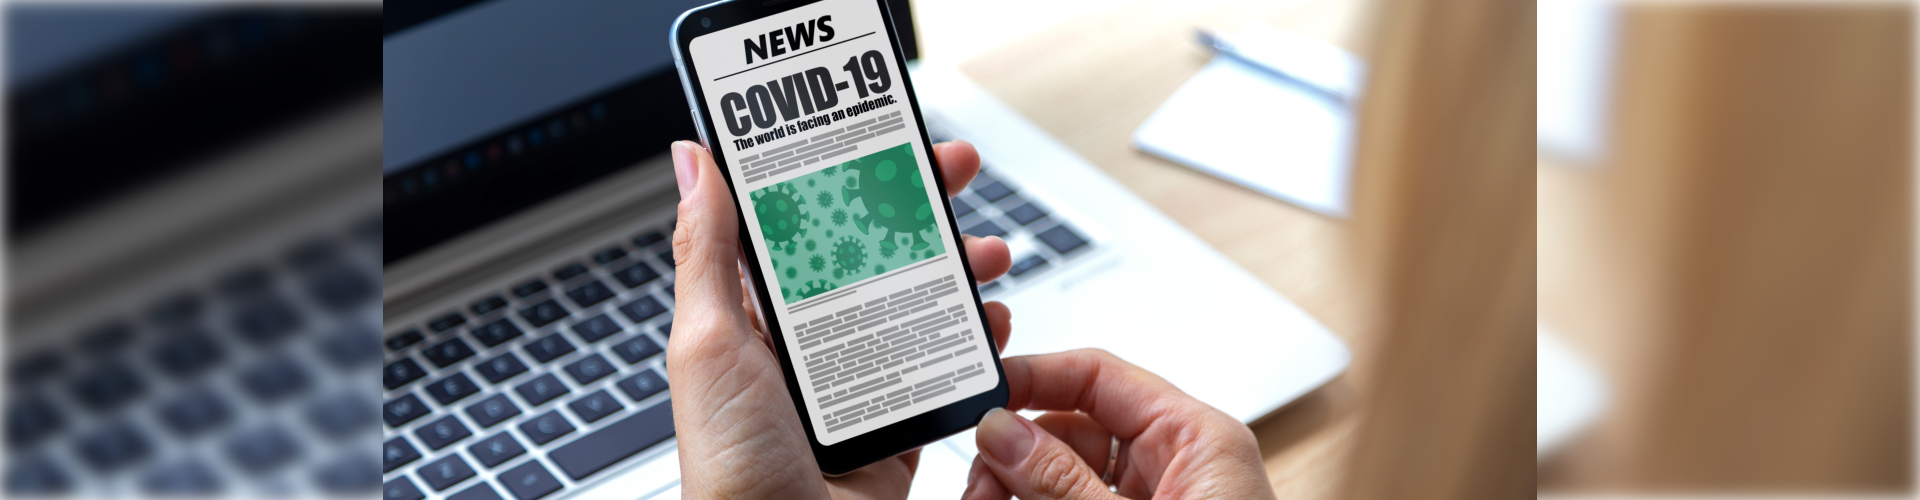 woman holding phone with covid news in display